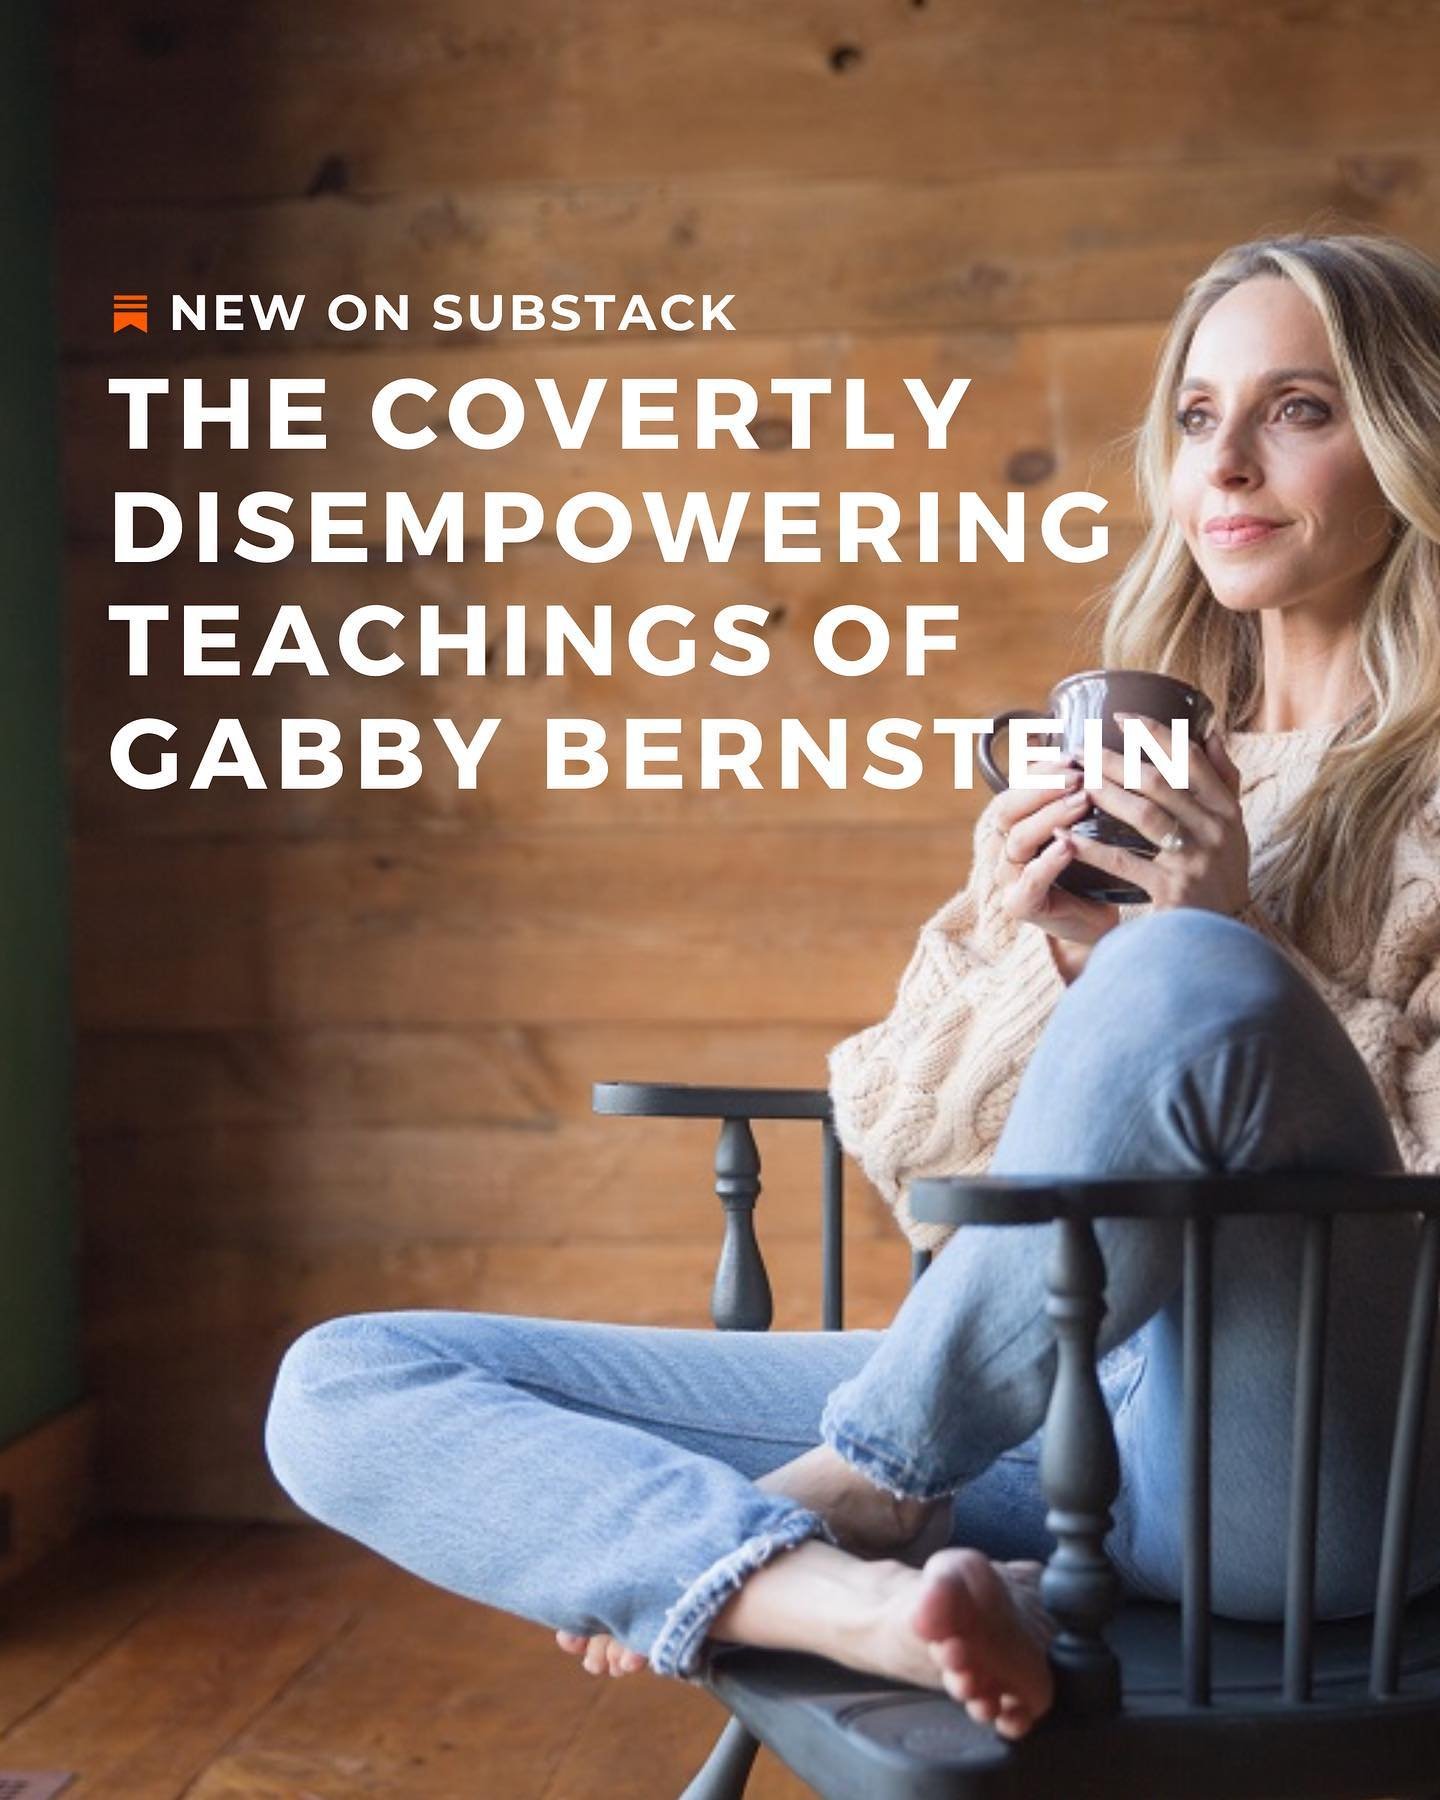 Did you catch the discussion on Gabby Bernstein as it unfolded in my stories?

We covered everything from the Law of Attraction to the repressed memory movement to Big Pharma to trauma to signs to judgment and then some!

If you&rsquo;re curious or m